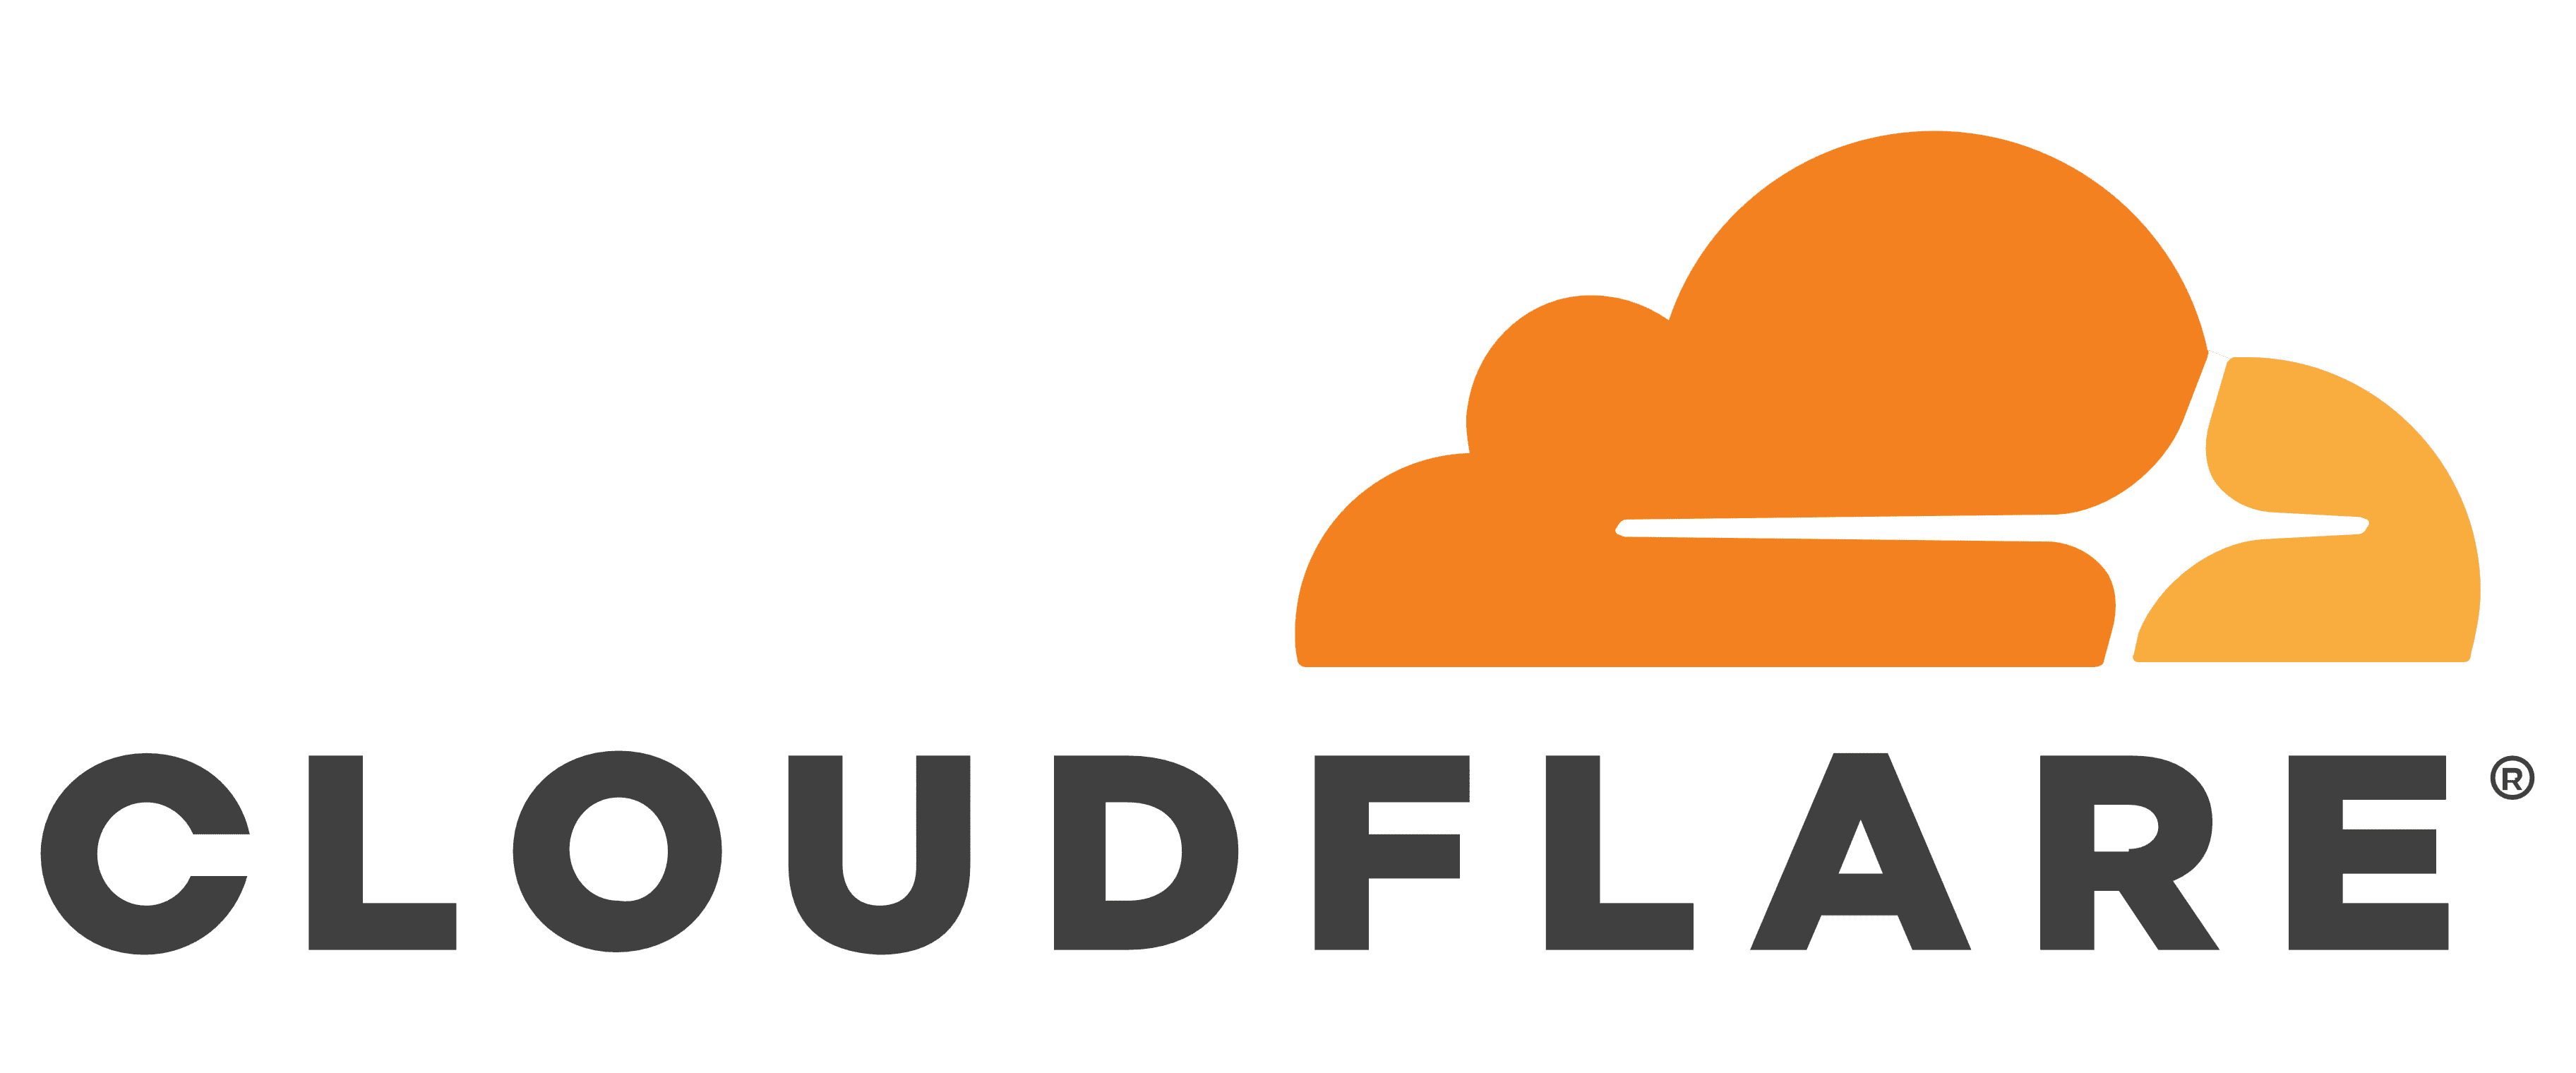 Cloudflare_logo_PNG1